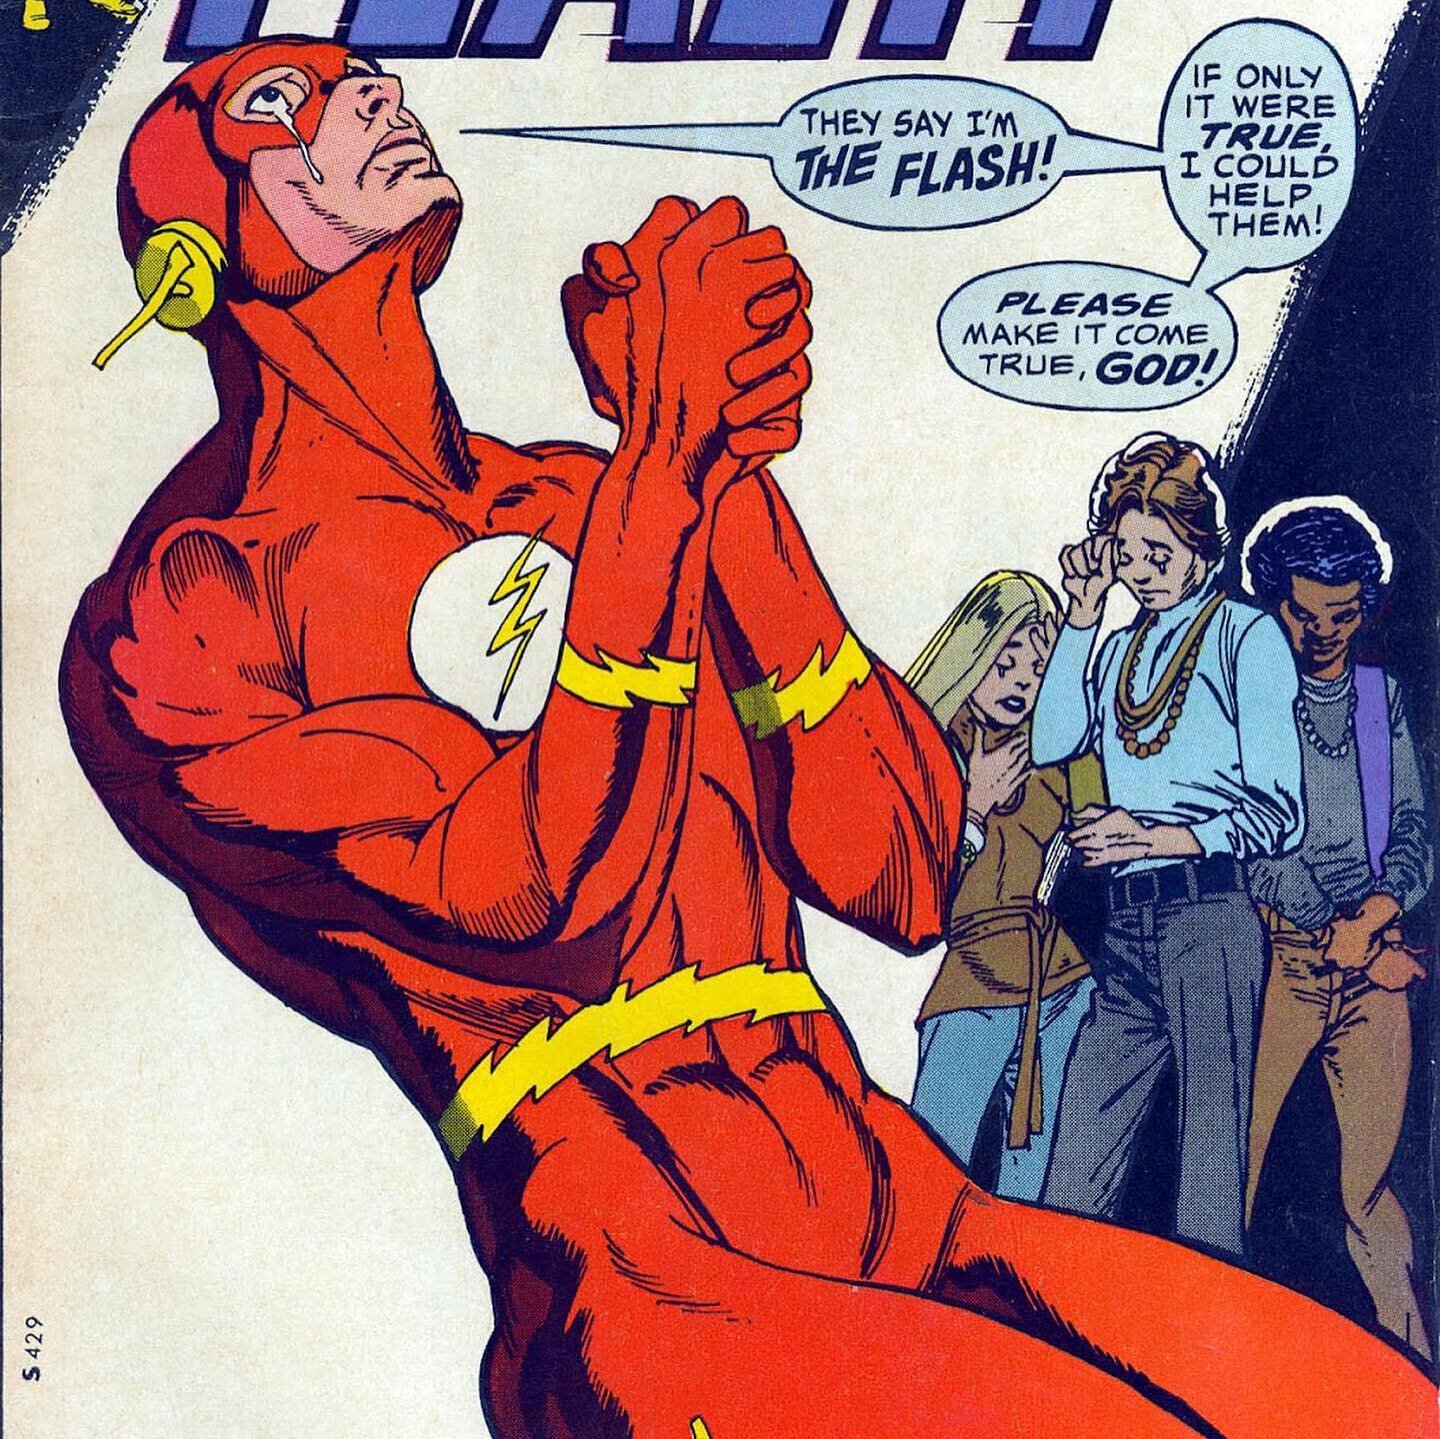 Oh no! Don't cry Flash, just because you don't know how to save these fine folks tons of cash on ALL their pop culture purchases! Let's be honest though, if the Scarlet Speedster had actually followed us on Instagram he'd know all about our Black Fri